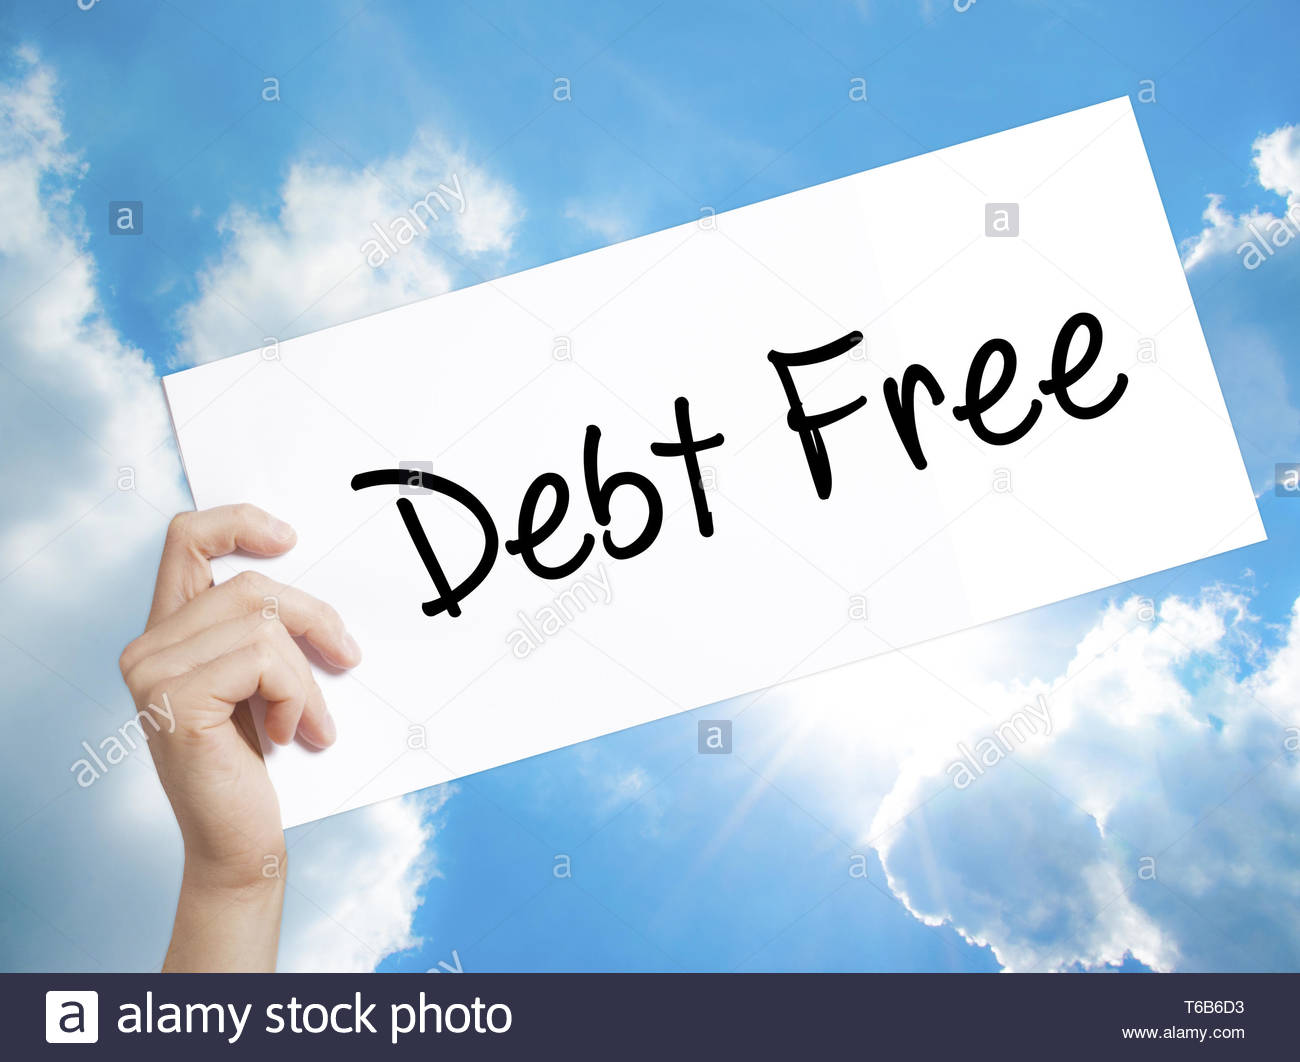 Debt Sign On White Paper Man Hand Holding With Text